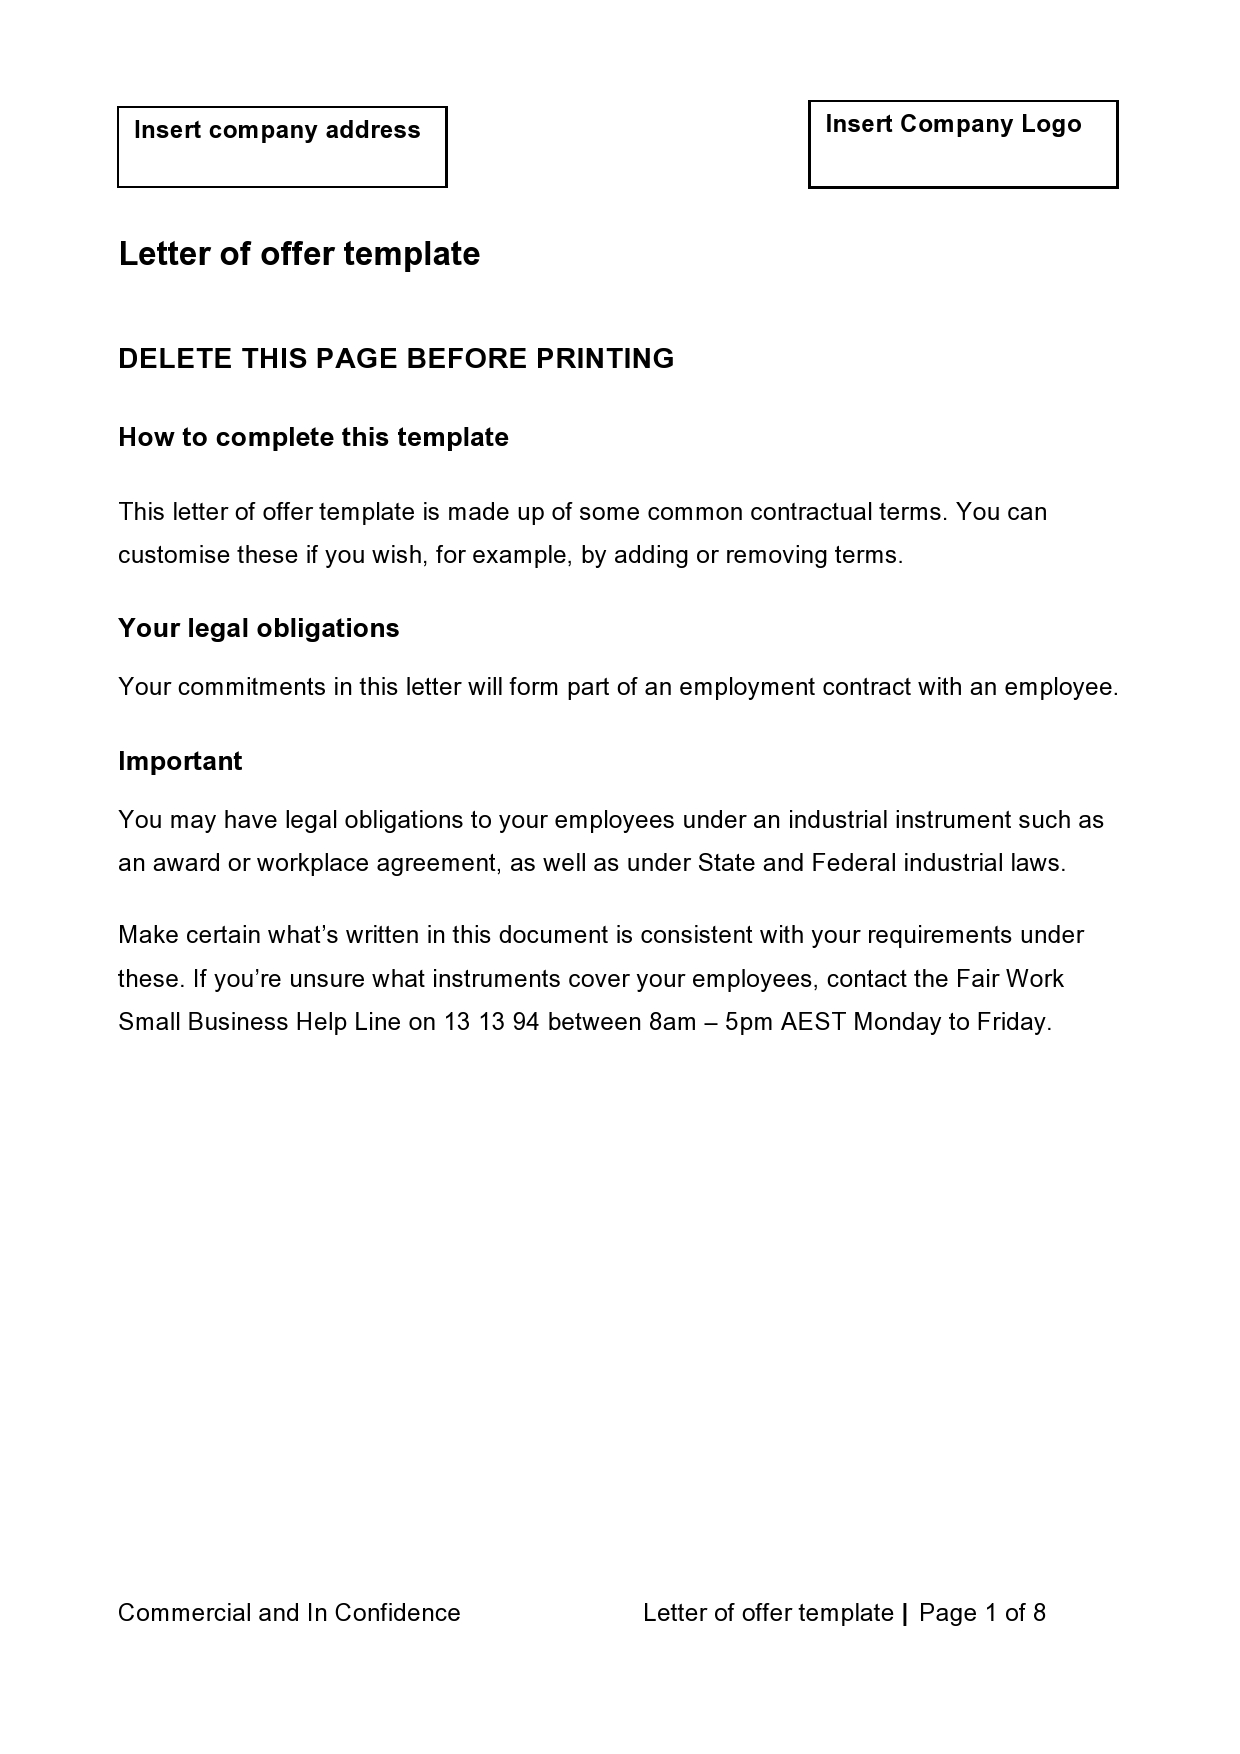 Free employment offer letter template 15